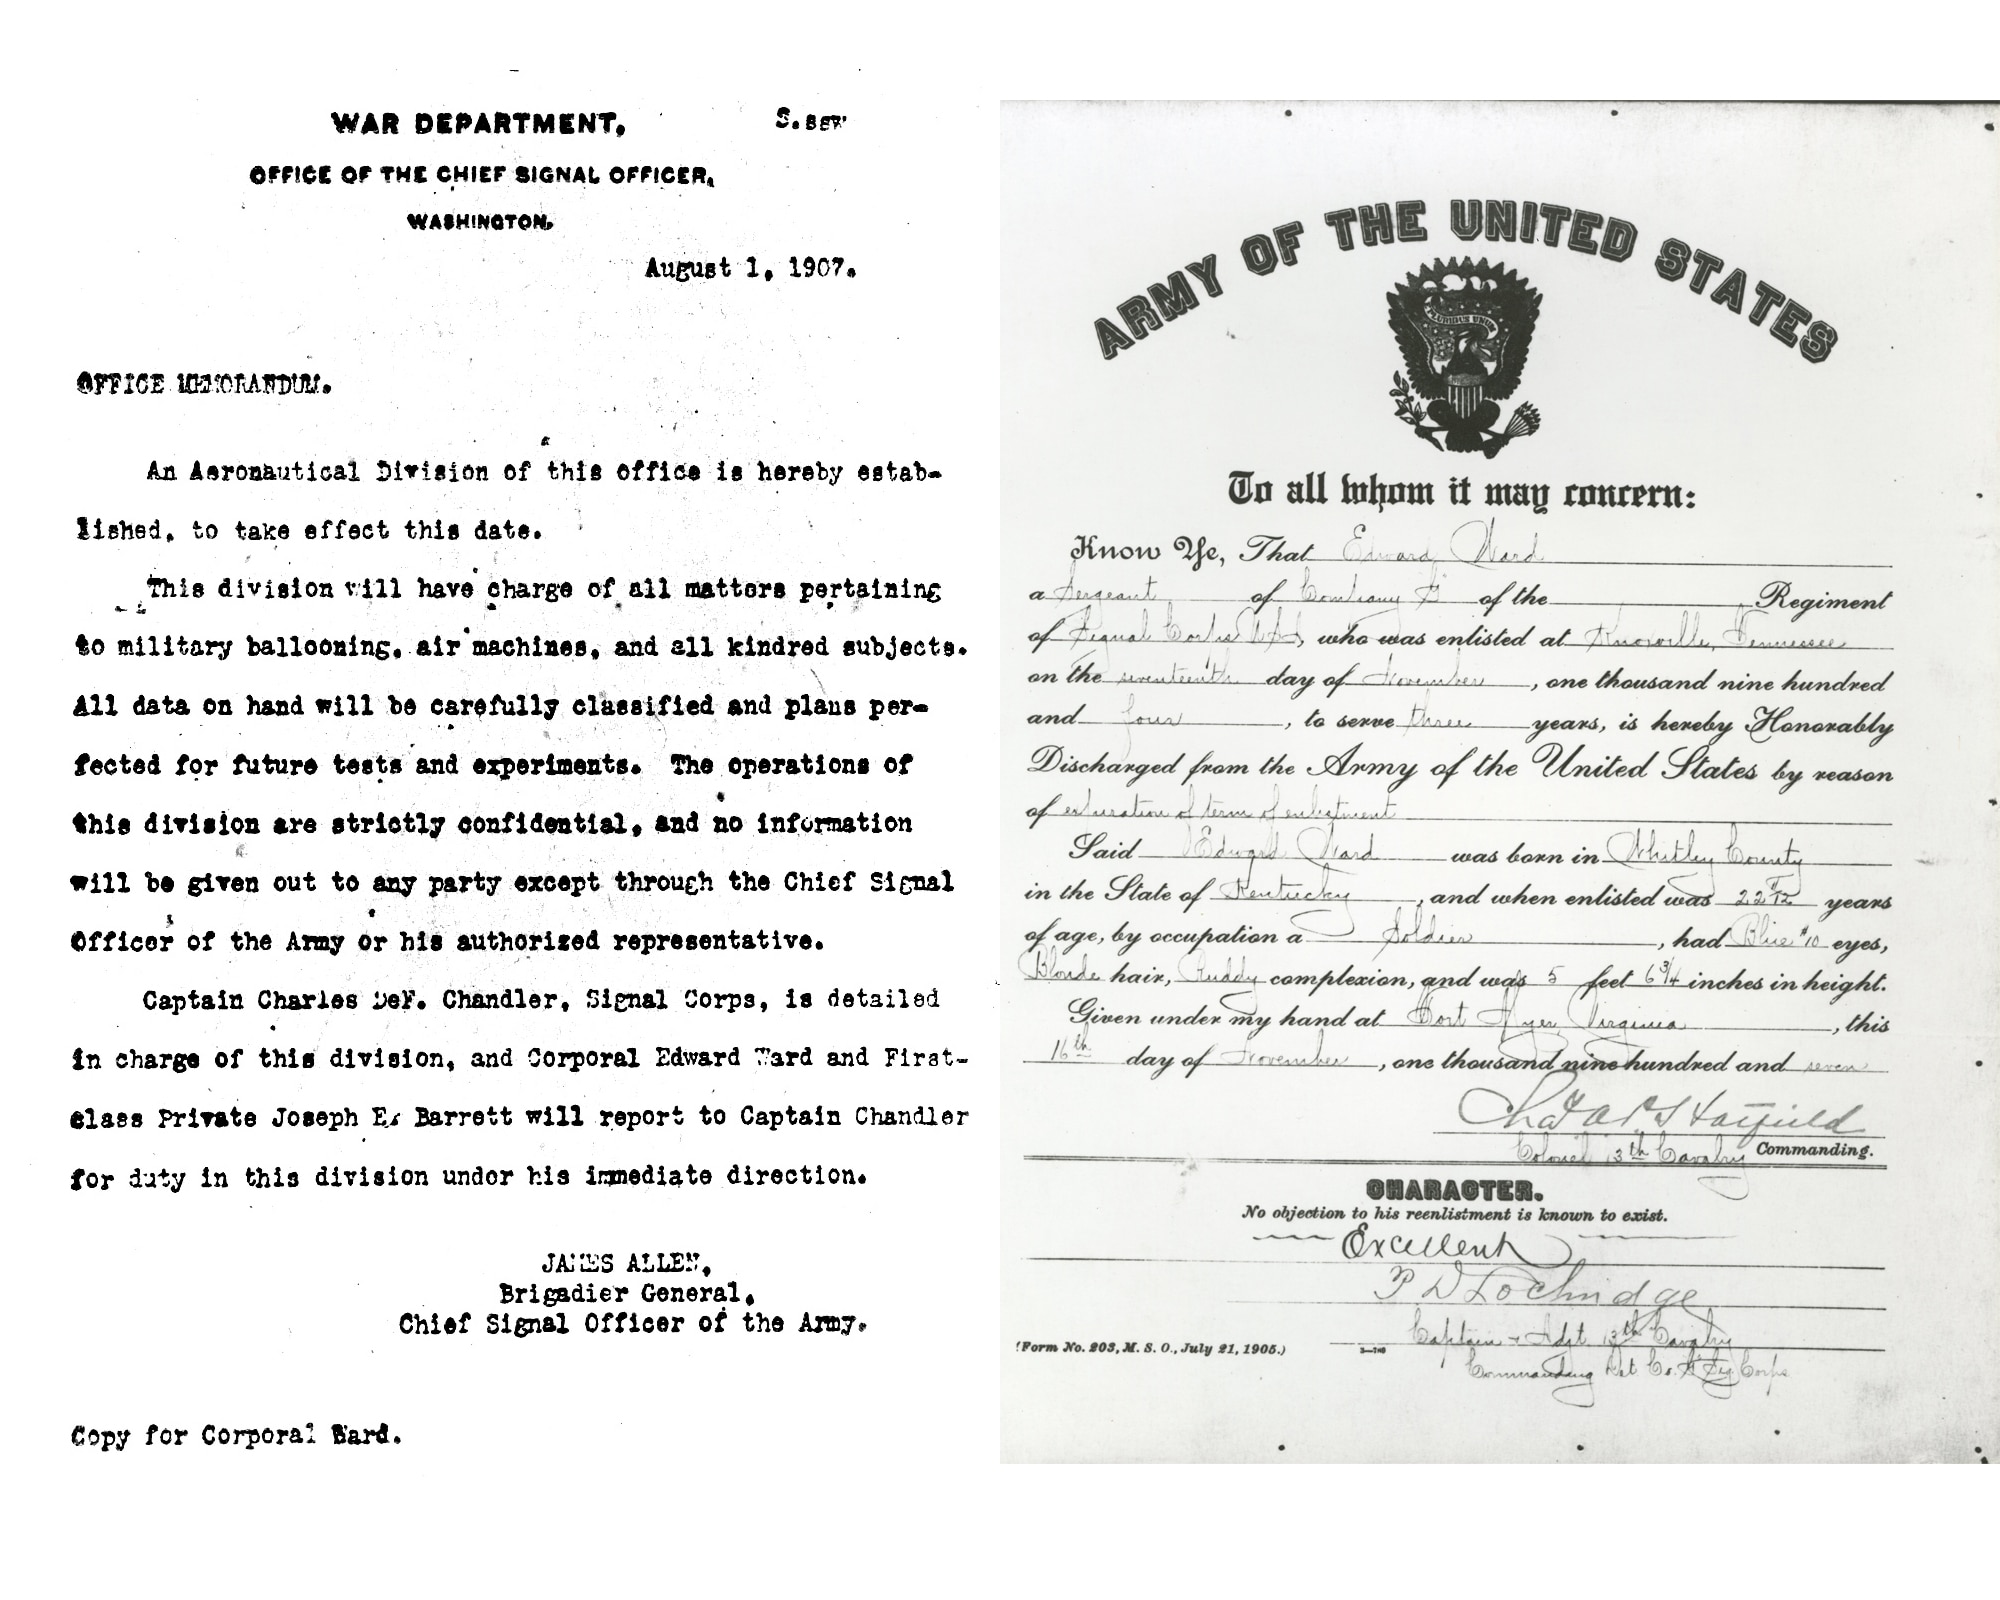 Copy of the letter assigning Ward to the Aeronautical Division of the Signal Corps(left) and Copy of Edward Ward’s Army discharge for the enlistment period during which he
was assigned to the Aeronautical Division of the Signal Corps. He reenlisted the
next day and served many years in the Army, retiring in 1930 as a captain in the
reserve.